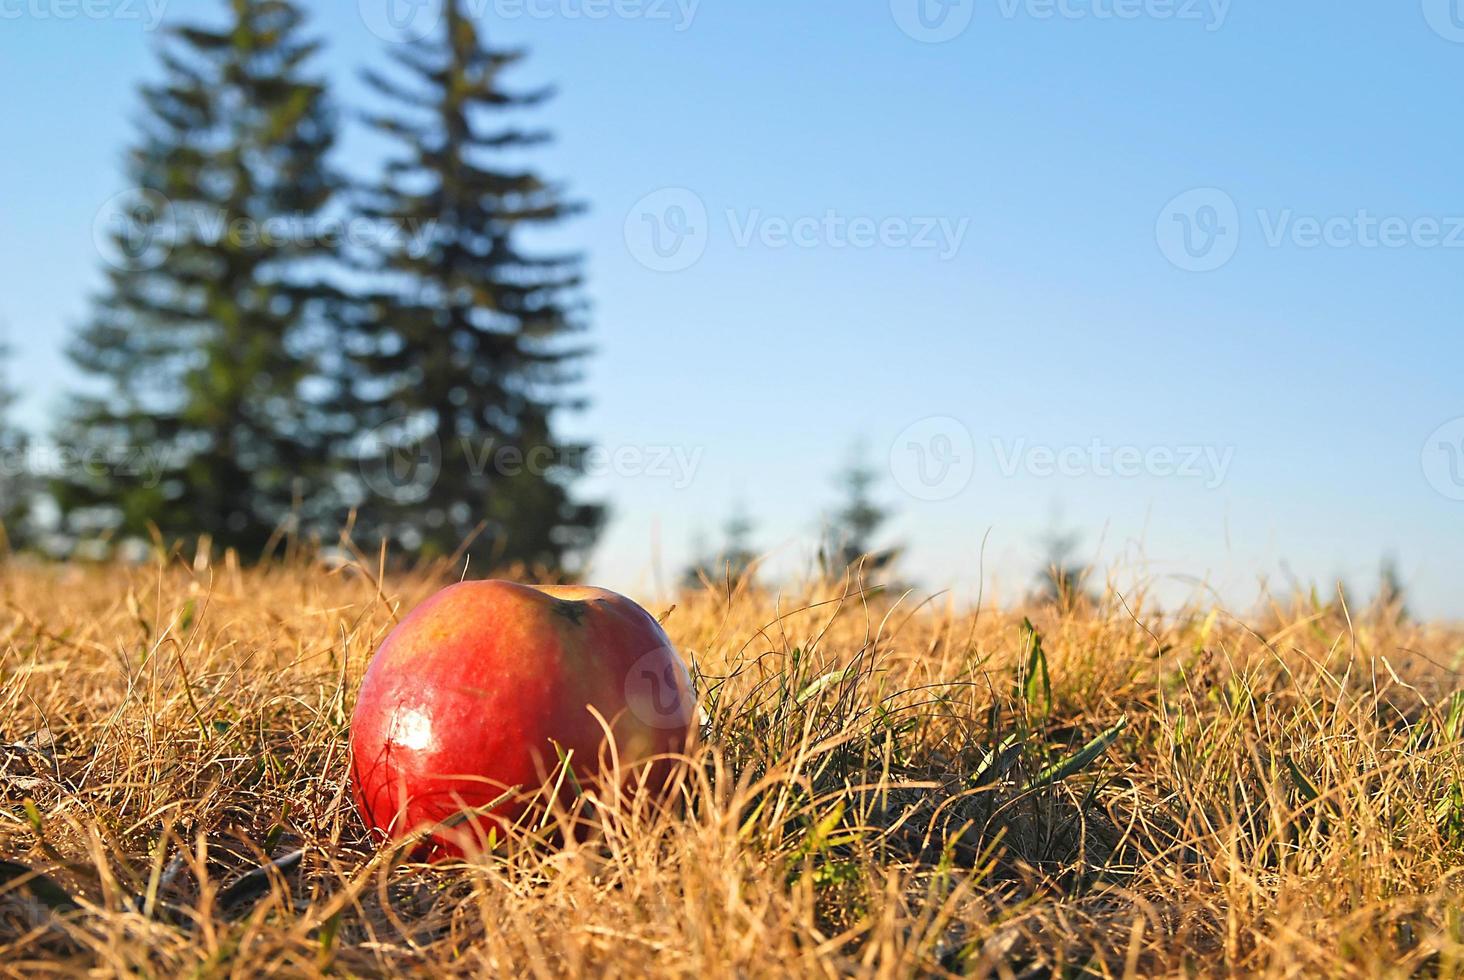 Red apple in grass photo